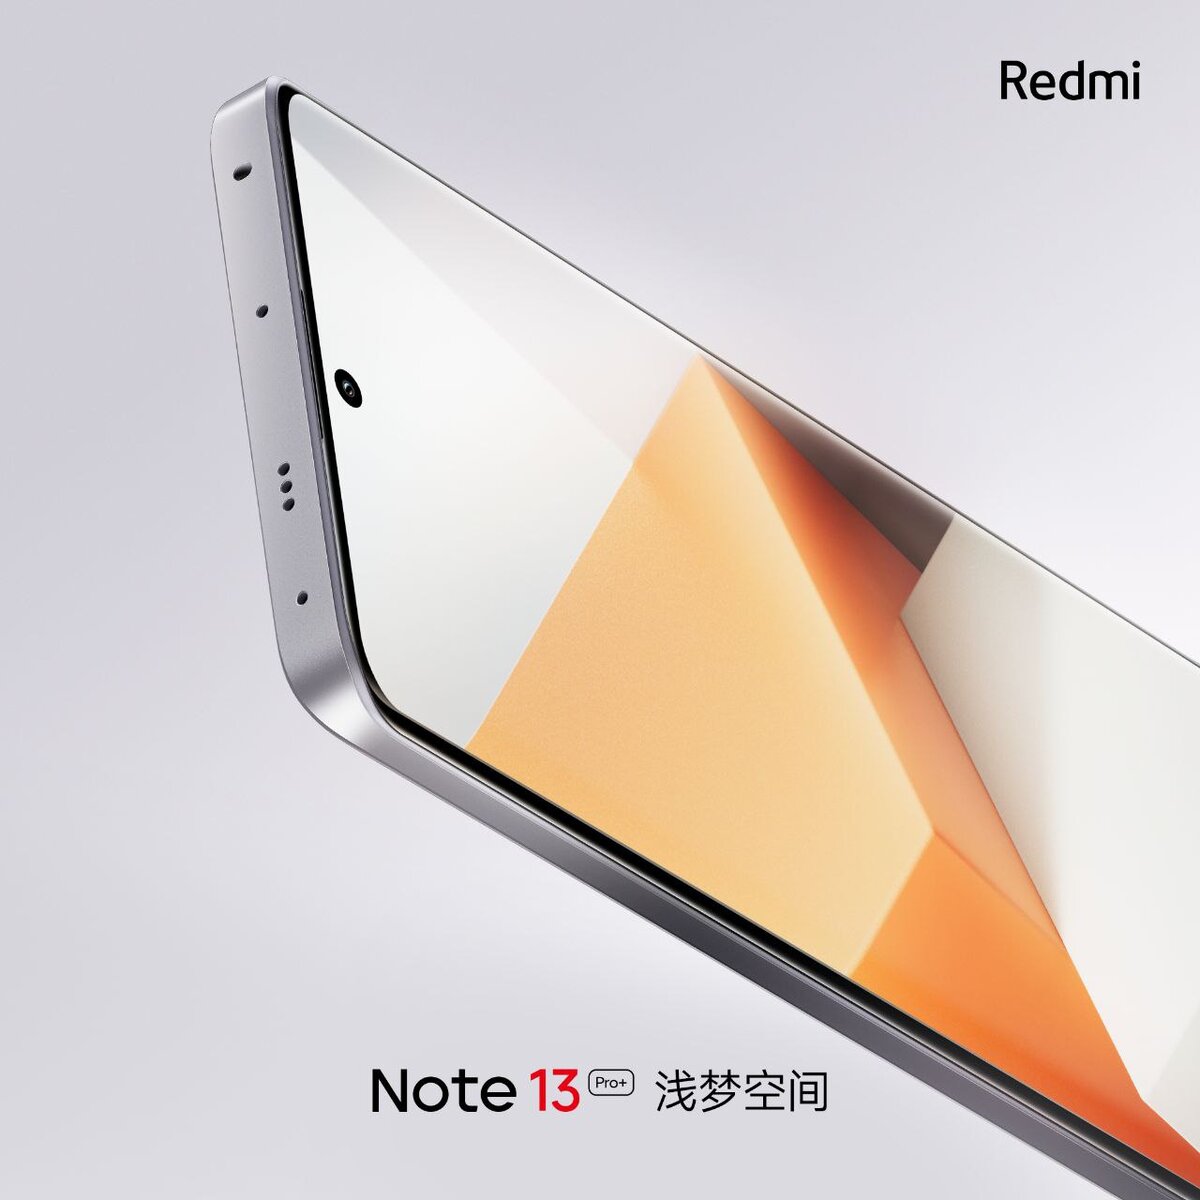 Get Turned On by Redmi Note 12S Pro's Stunning Design